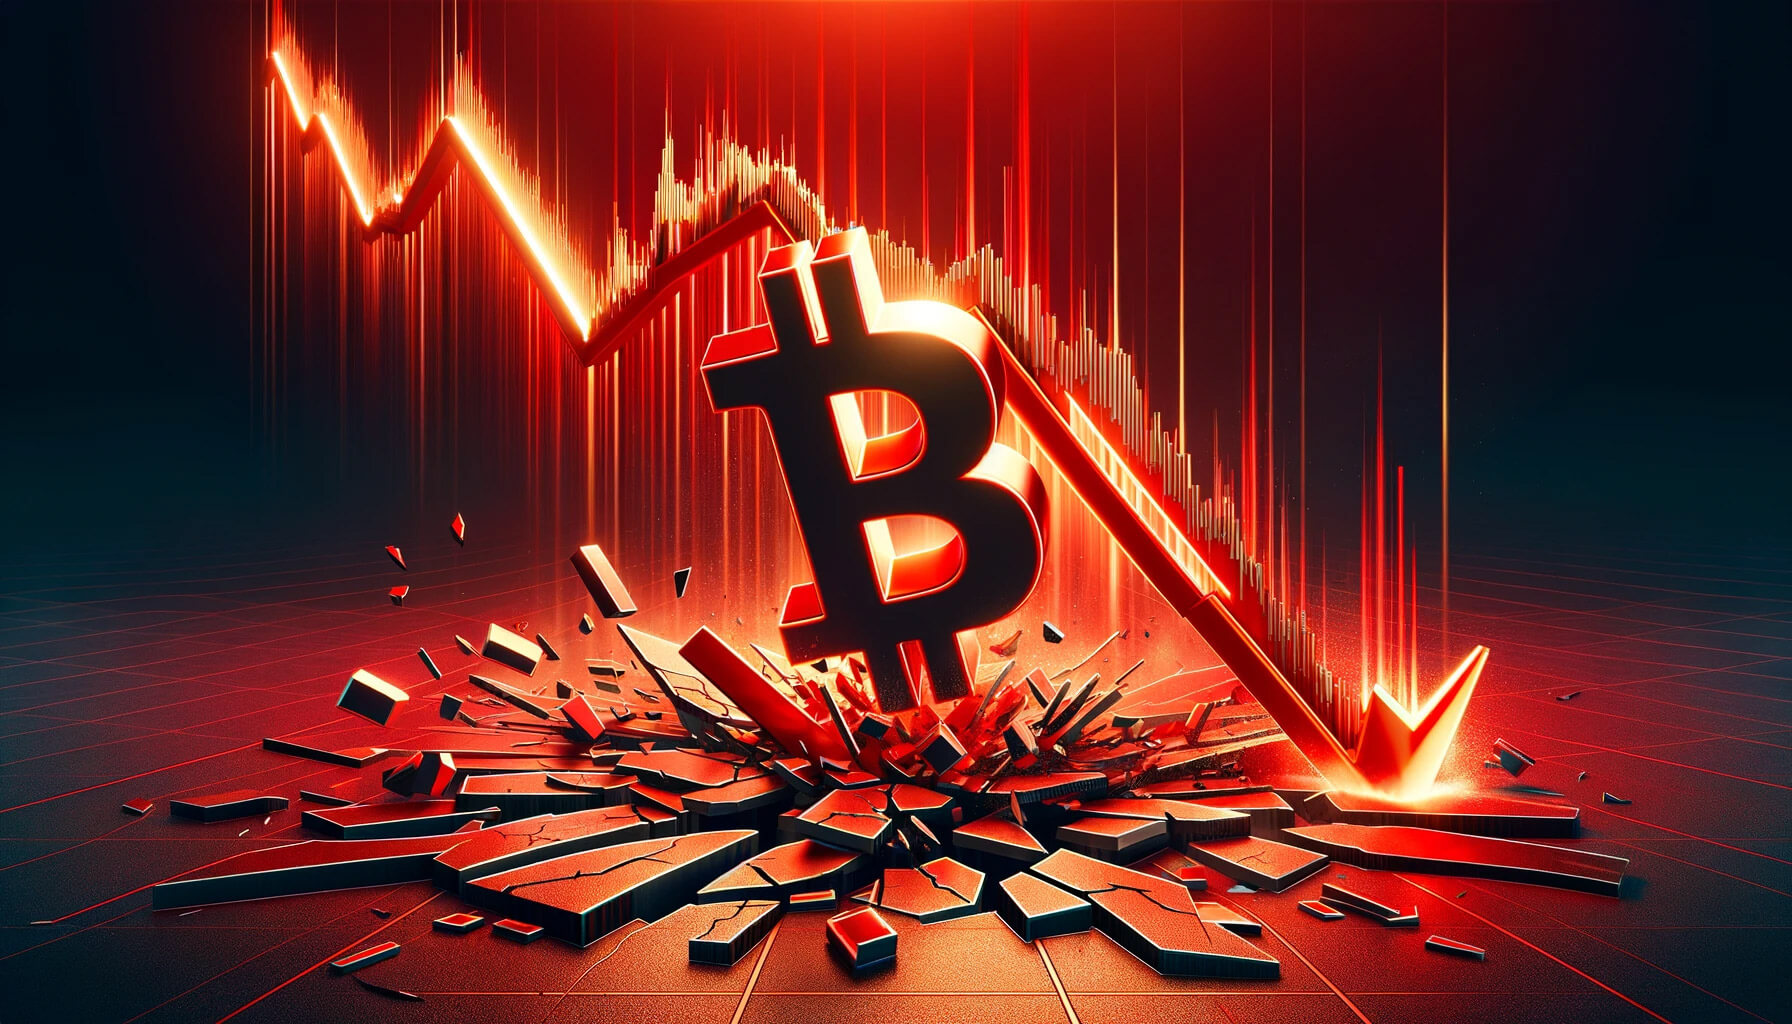 Bitcoin's crash to $65k causes meltdown for alts